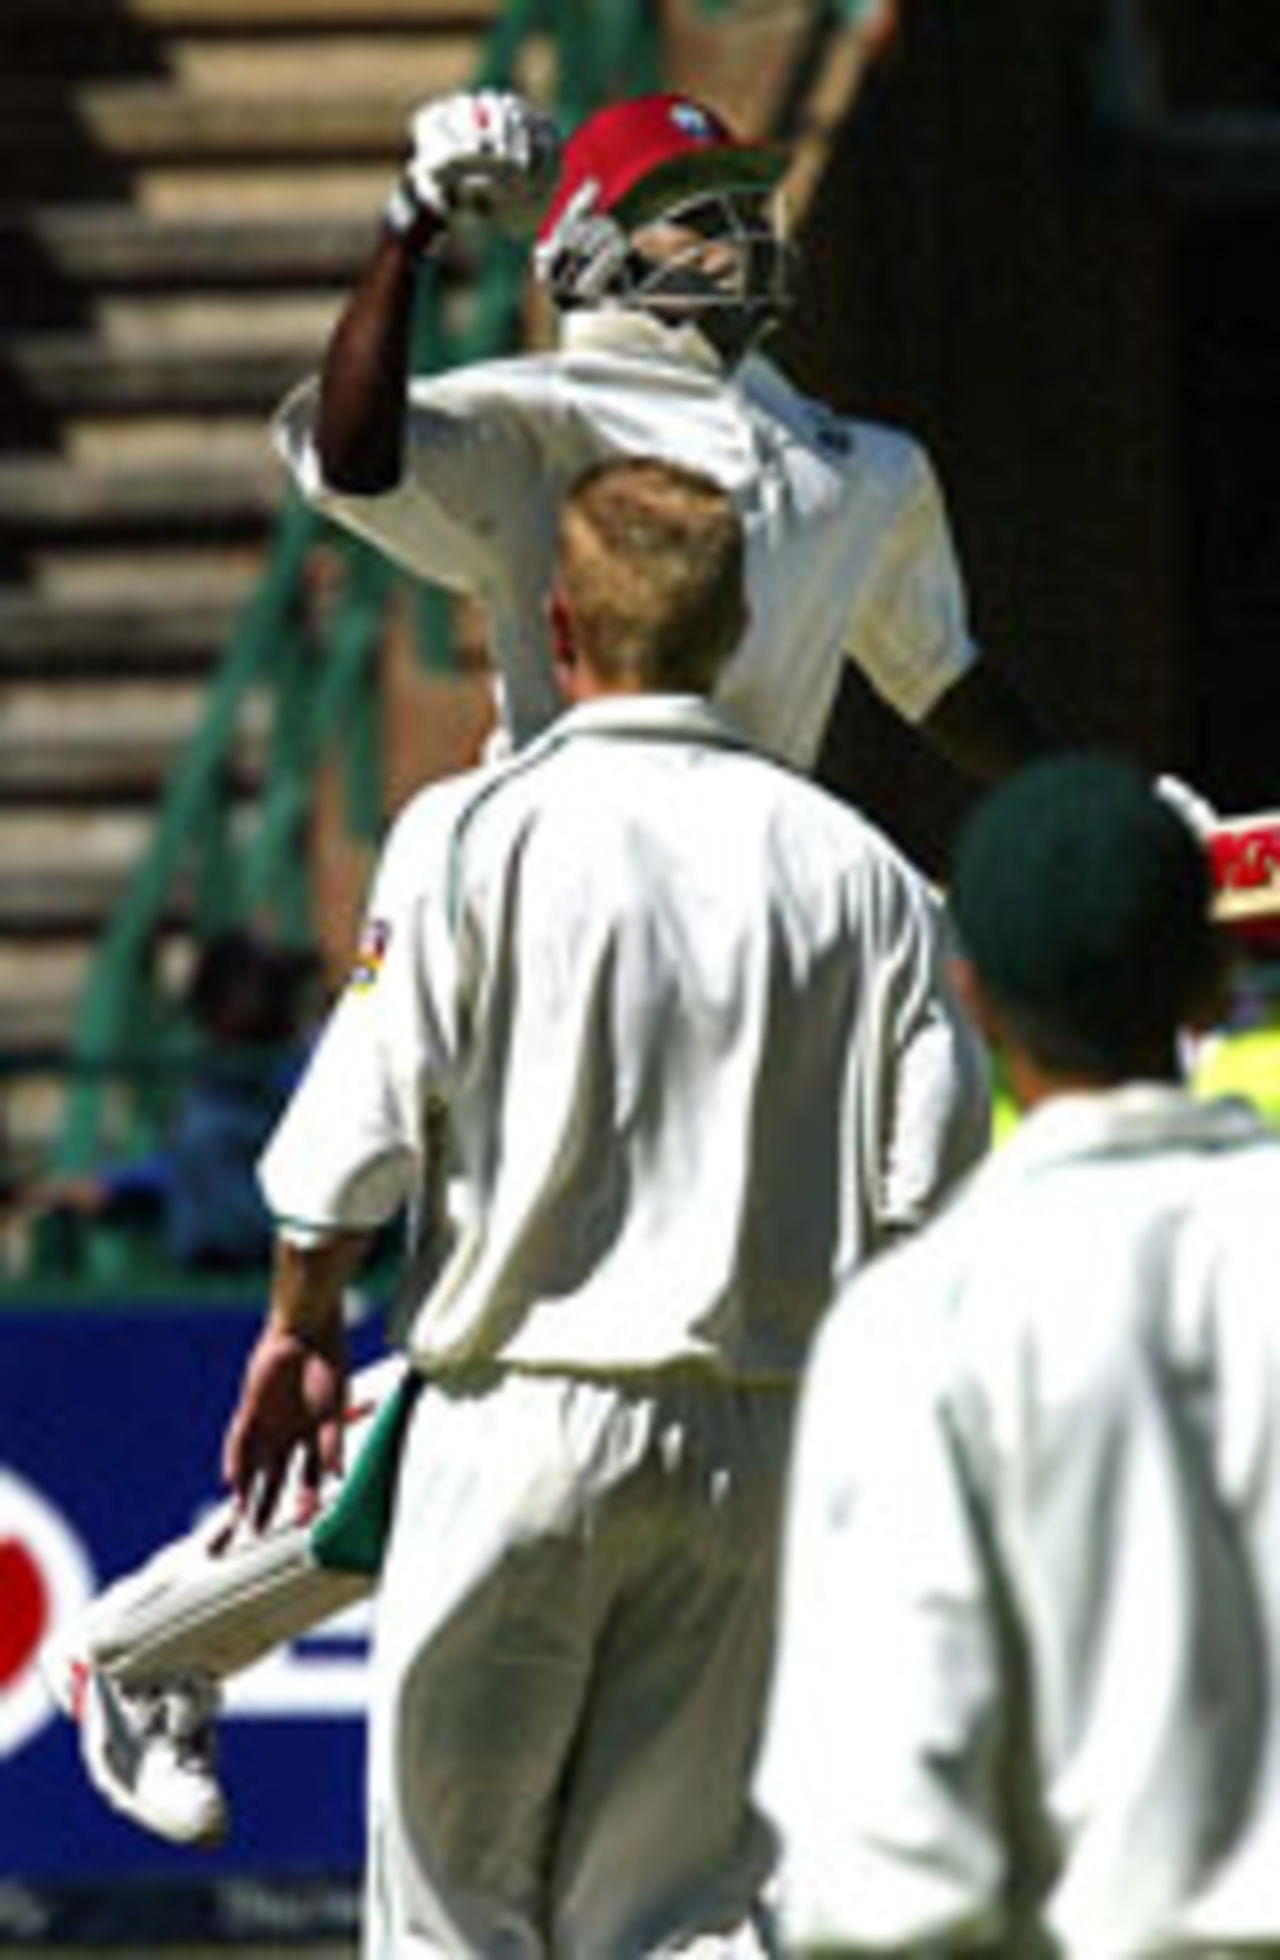 Brian Lara celebrates his hundred at Wanderers, South Africa v West Indies, 1st Test, 3rd Day, December 14, 2003